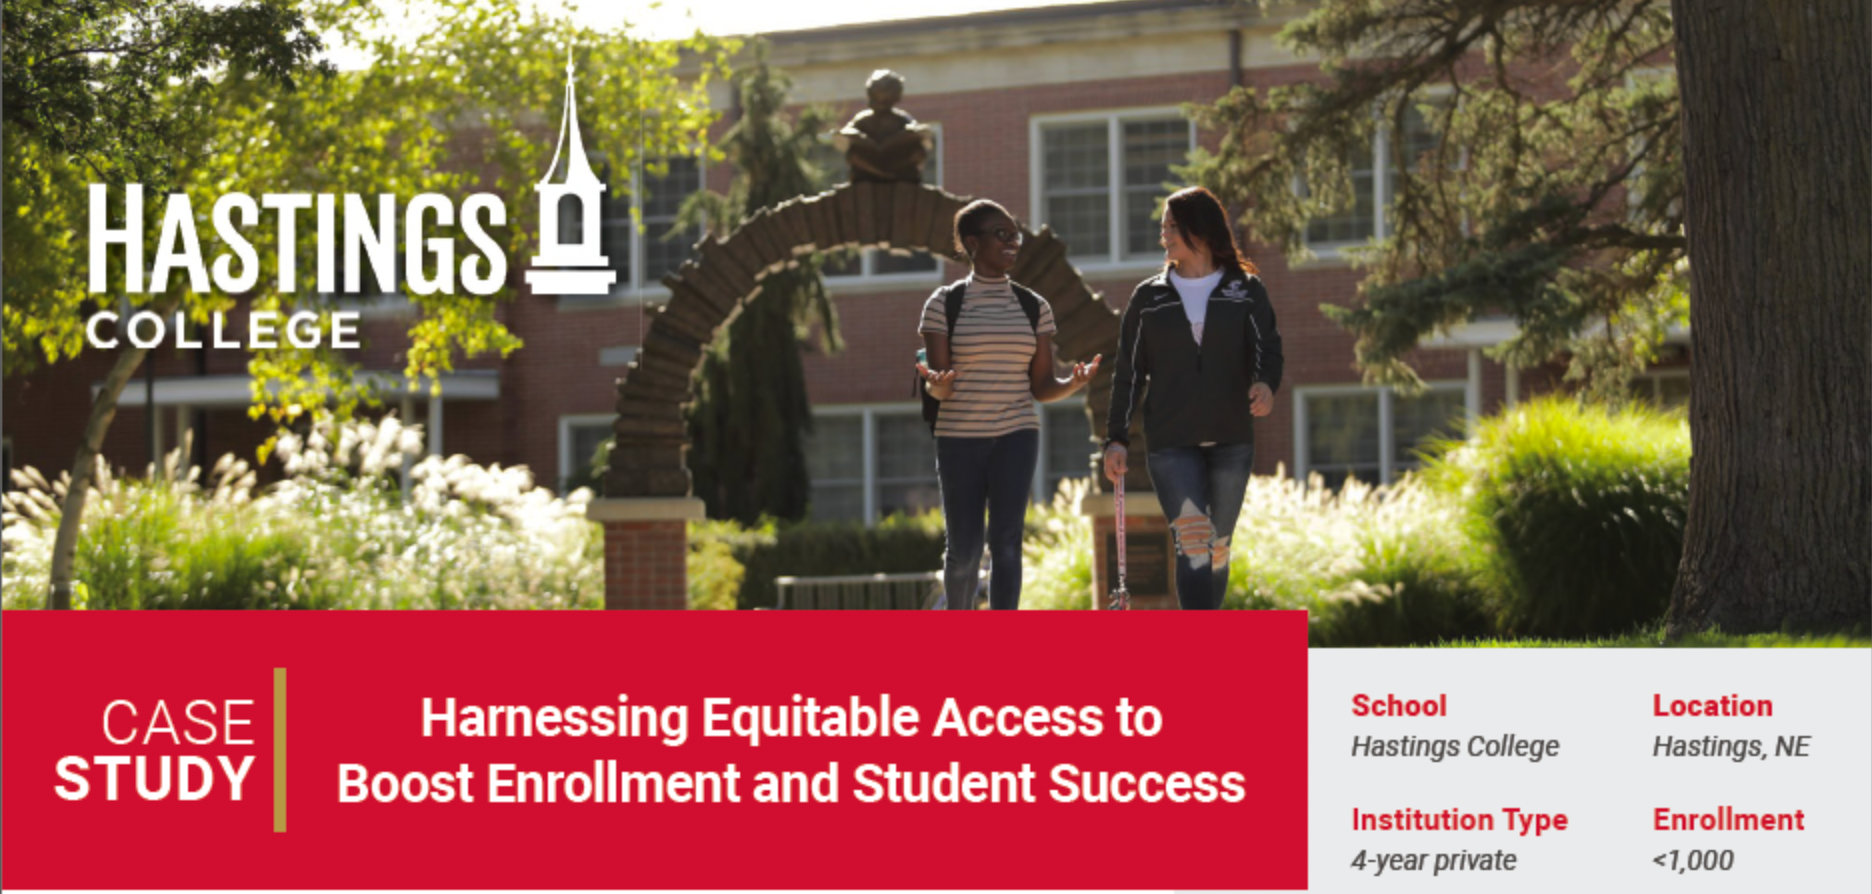 Hastings College Case Study: Harnessing Equitable Access to Boost Enrollment and Student Success. School: Hastings College. Institution Type: 4-year private. Location: Hastings, NE. Enrollment: <1000